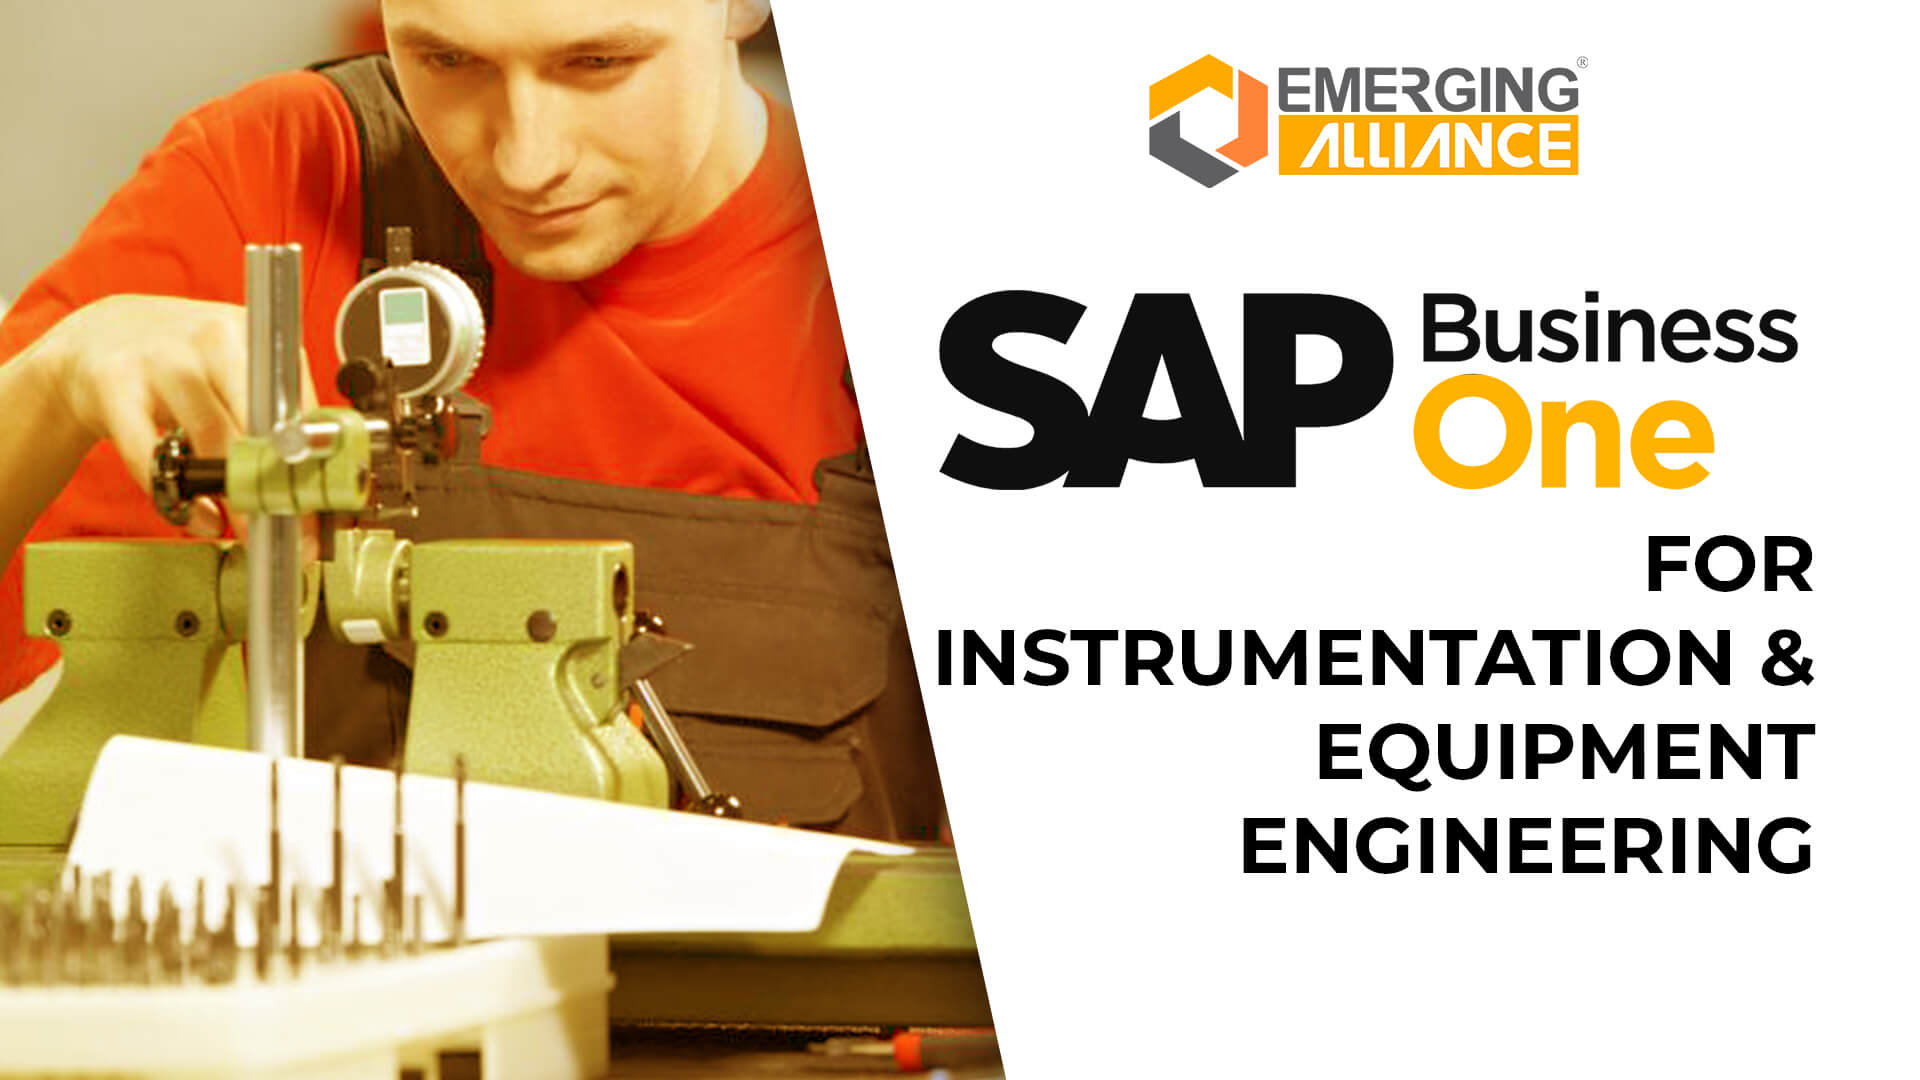 sap business one for instrumentation & equipment engineering